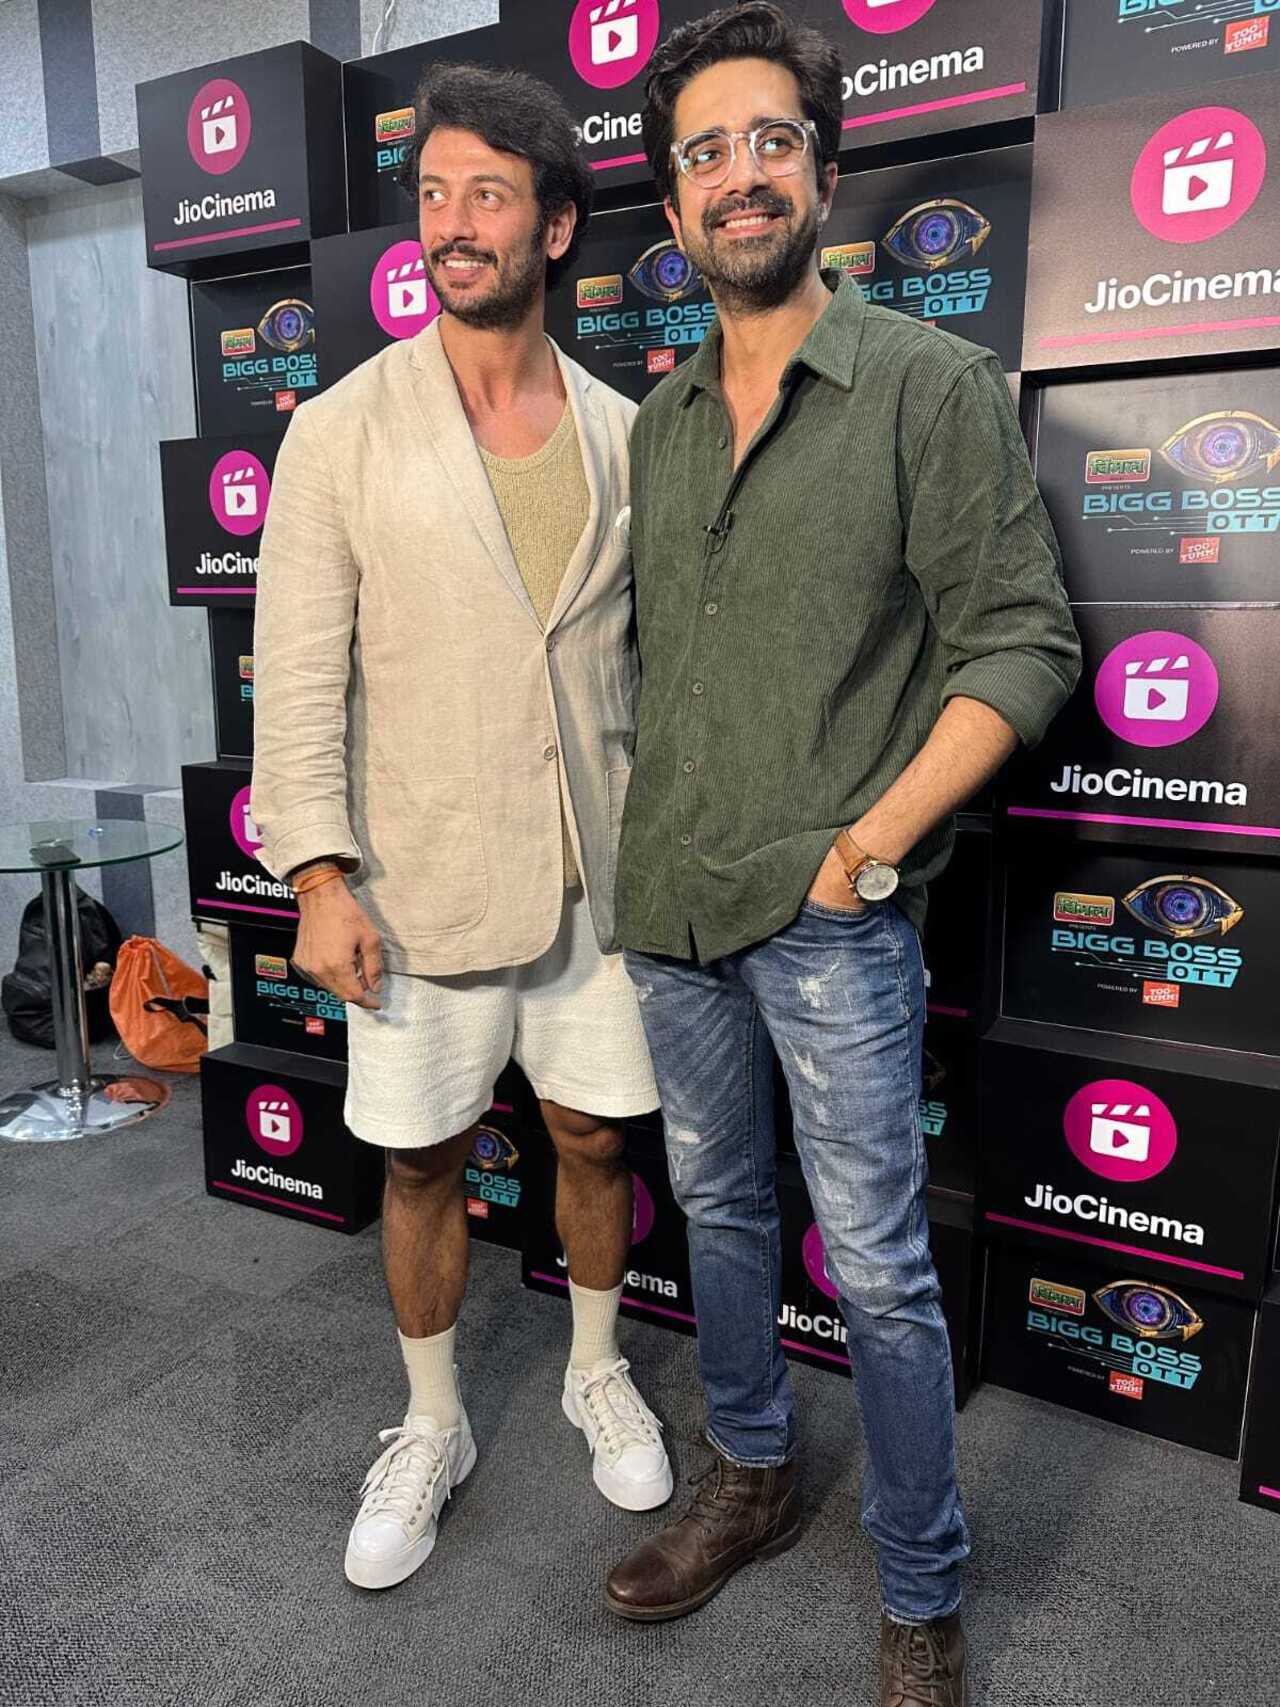 Avinash Sachdev and Jad Hadid were spotted at the Viacom 18 office post their exit from Bigg Boss OTT 2